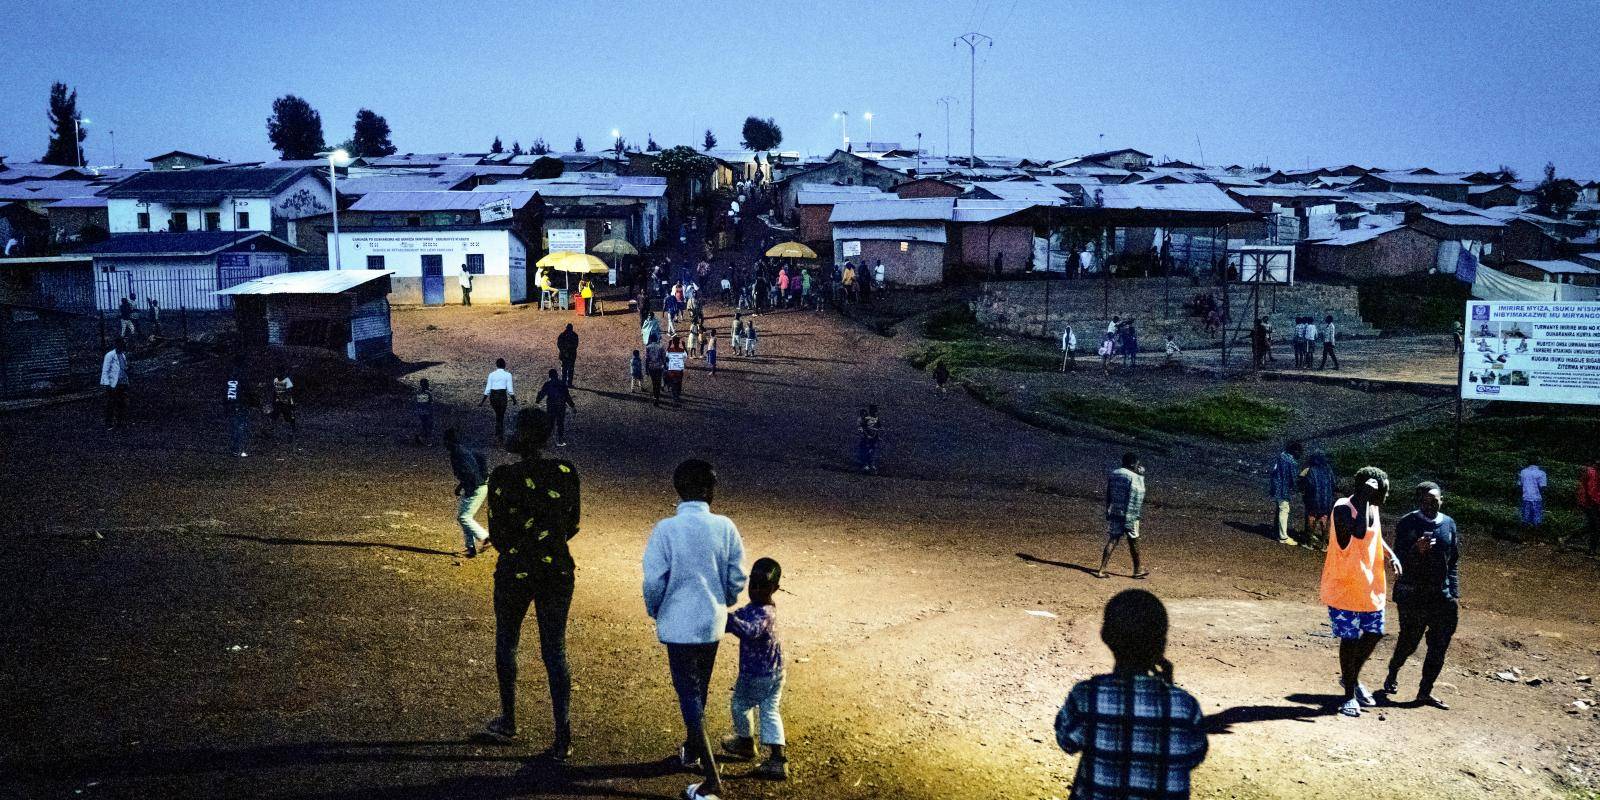 Photo shows market square at Gihembe refugee camp lit up at night